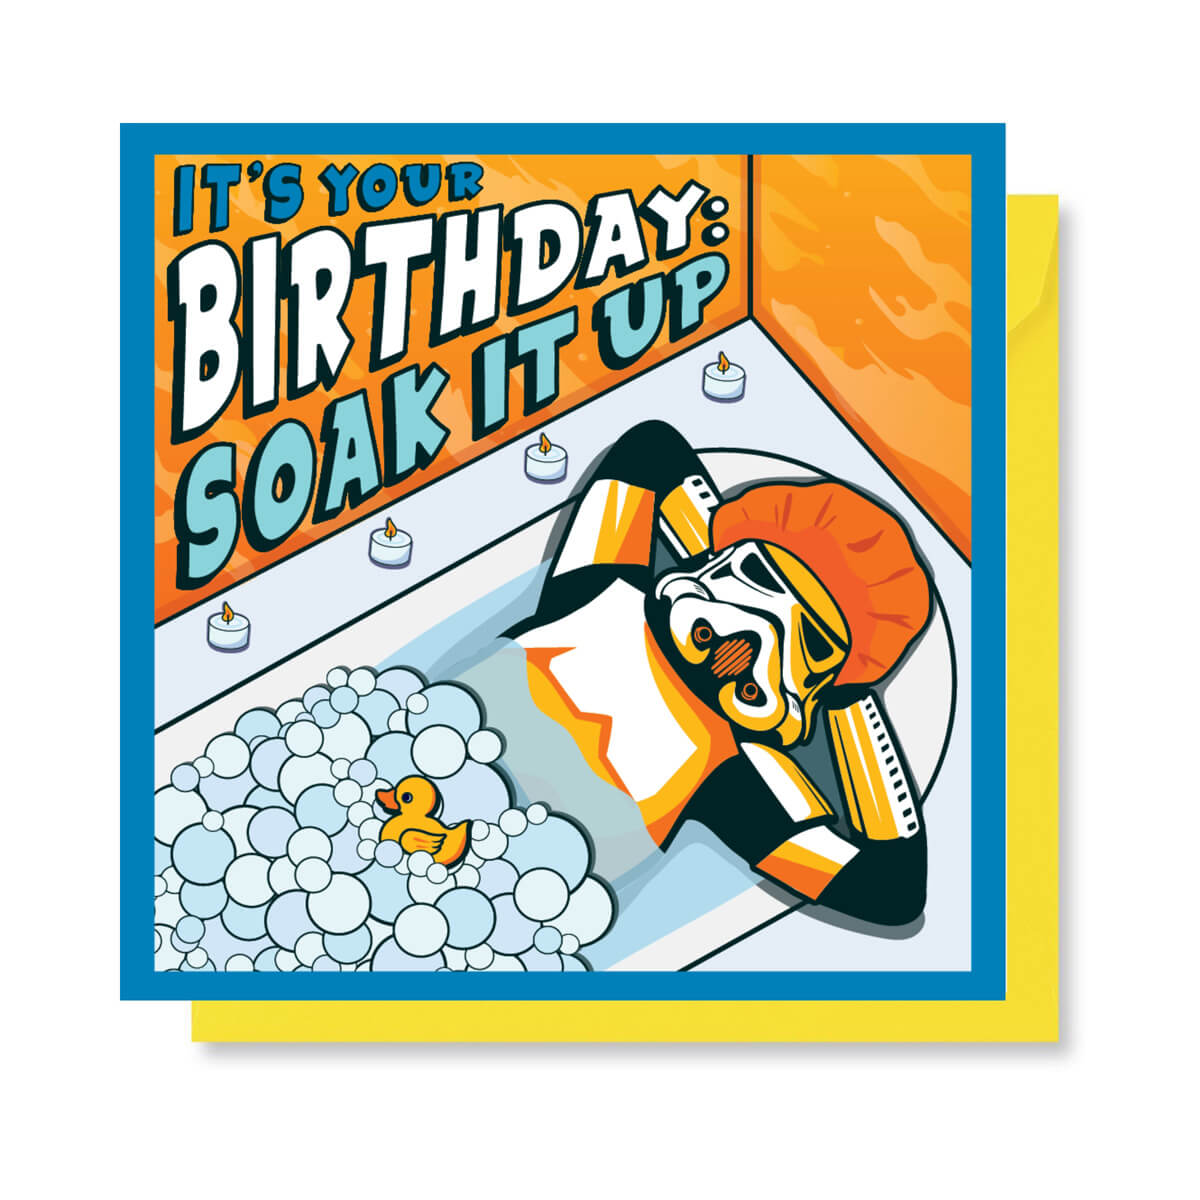 Original Stormtrooper - Its Your Birthday Soak It Up Card for Star Wars fans - officially licensed by Cardology